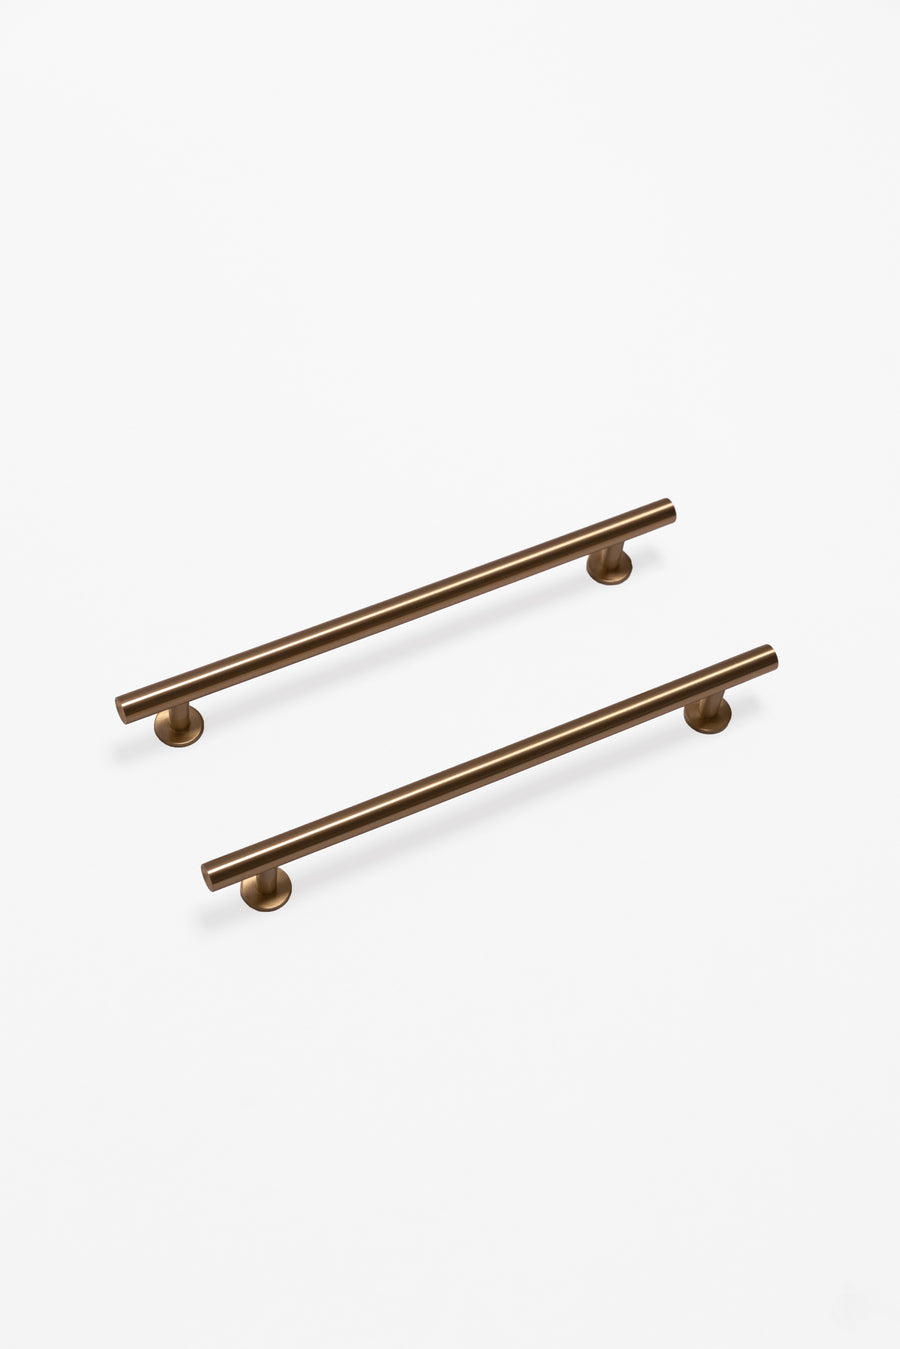 Georgia Brass Cabinetry Handle - Little Swagger